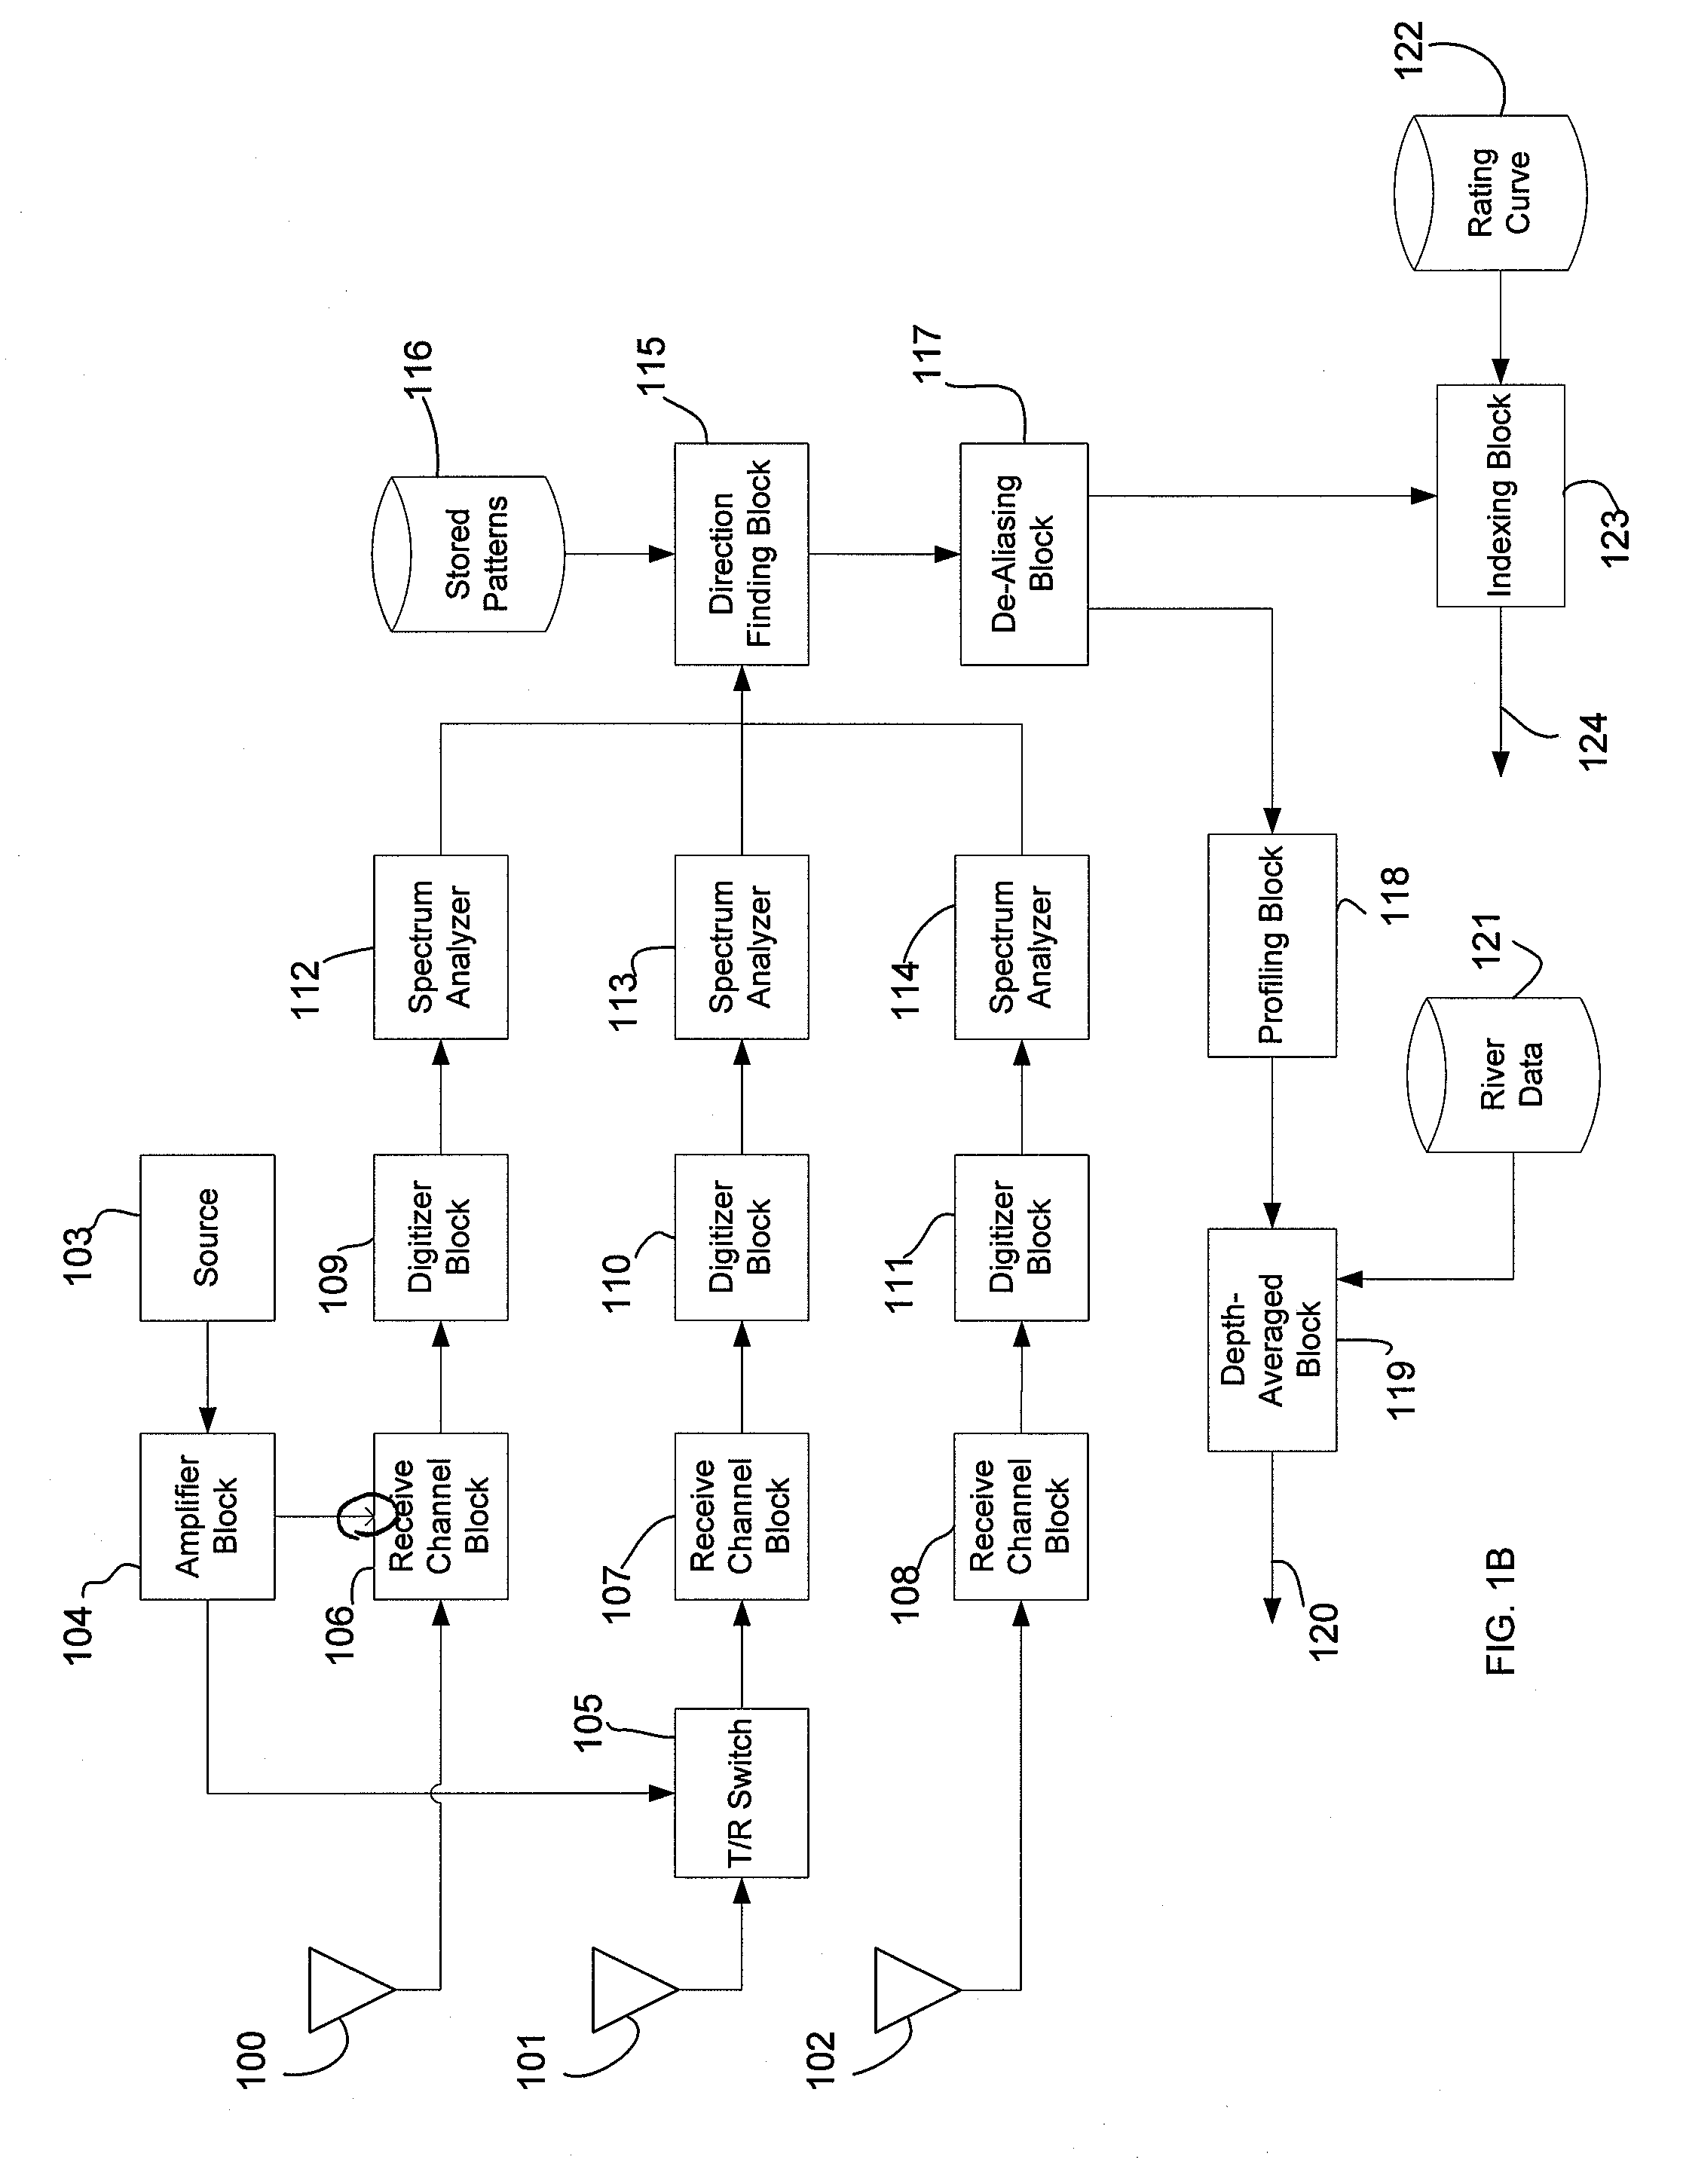 Systems and methods for monitoring river flow parameters using a VHF/UHF radar station